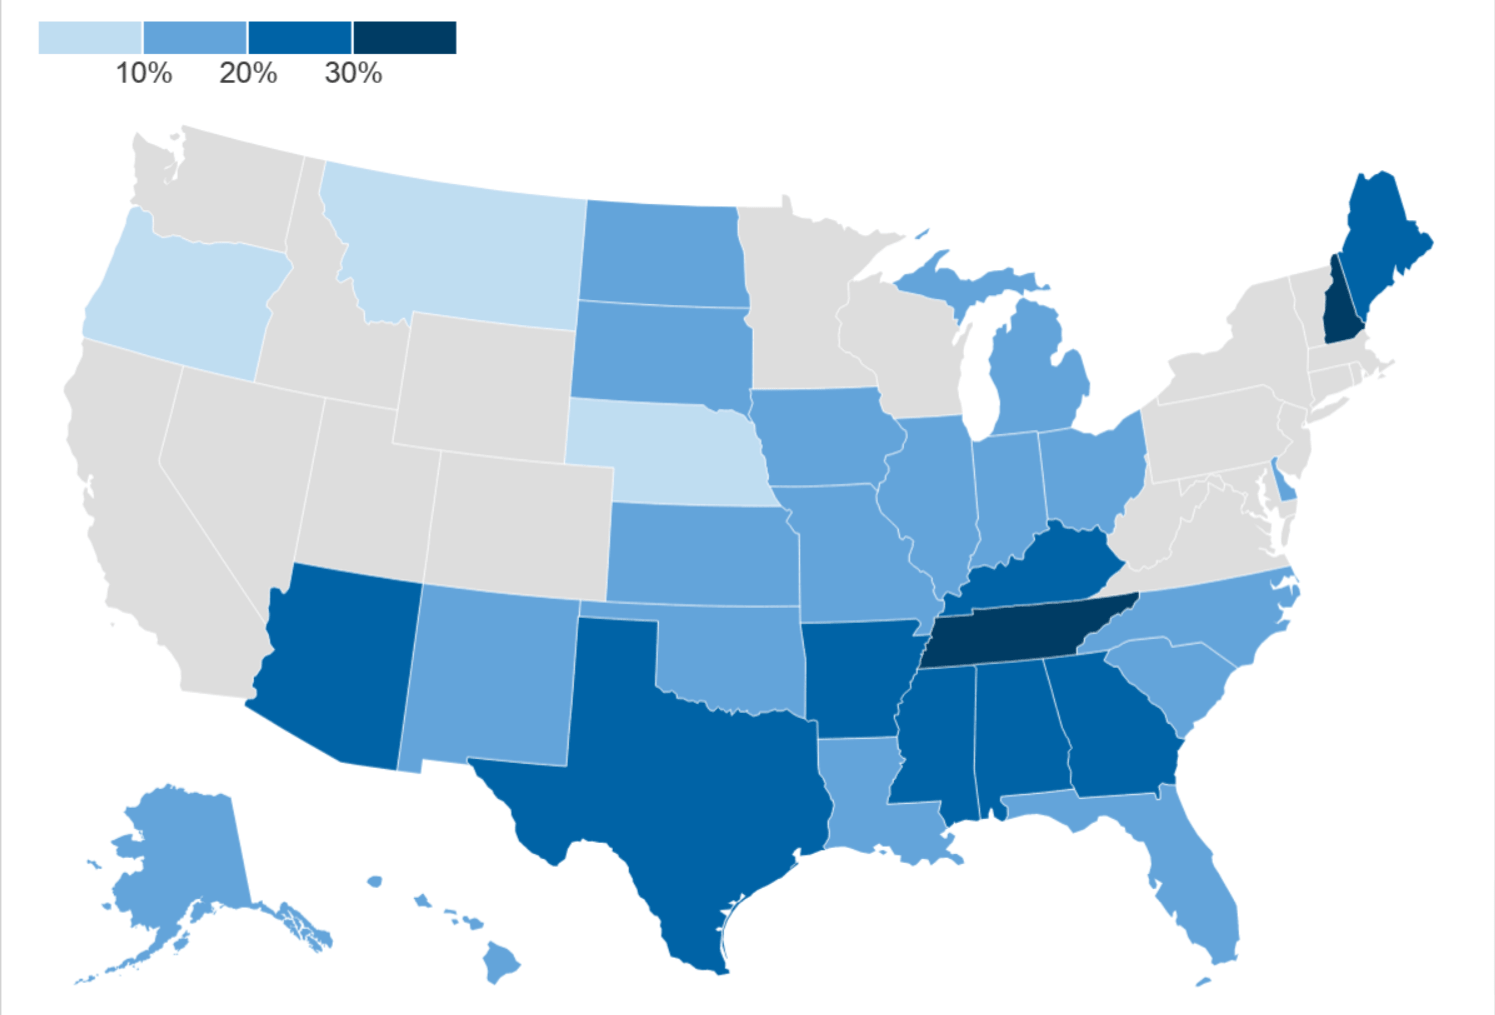 State-wise breakdown of average denial rate for in-network claims by healthcare.gov issuers, 2019